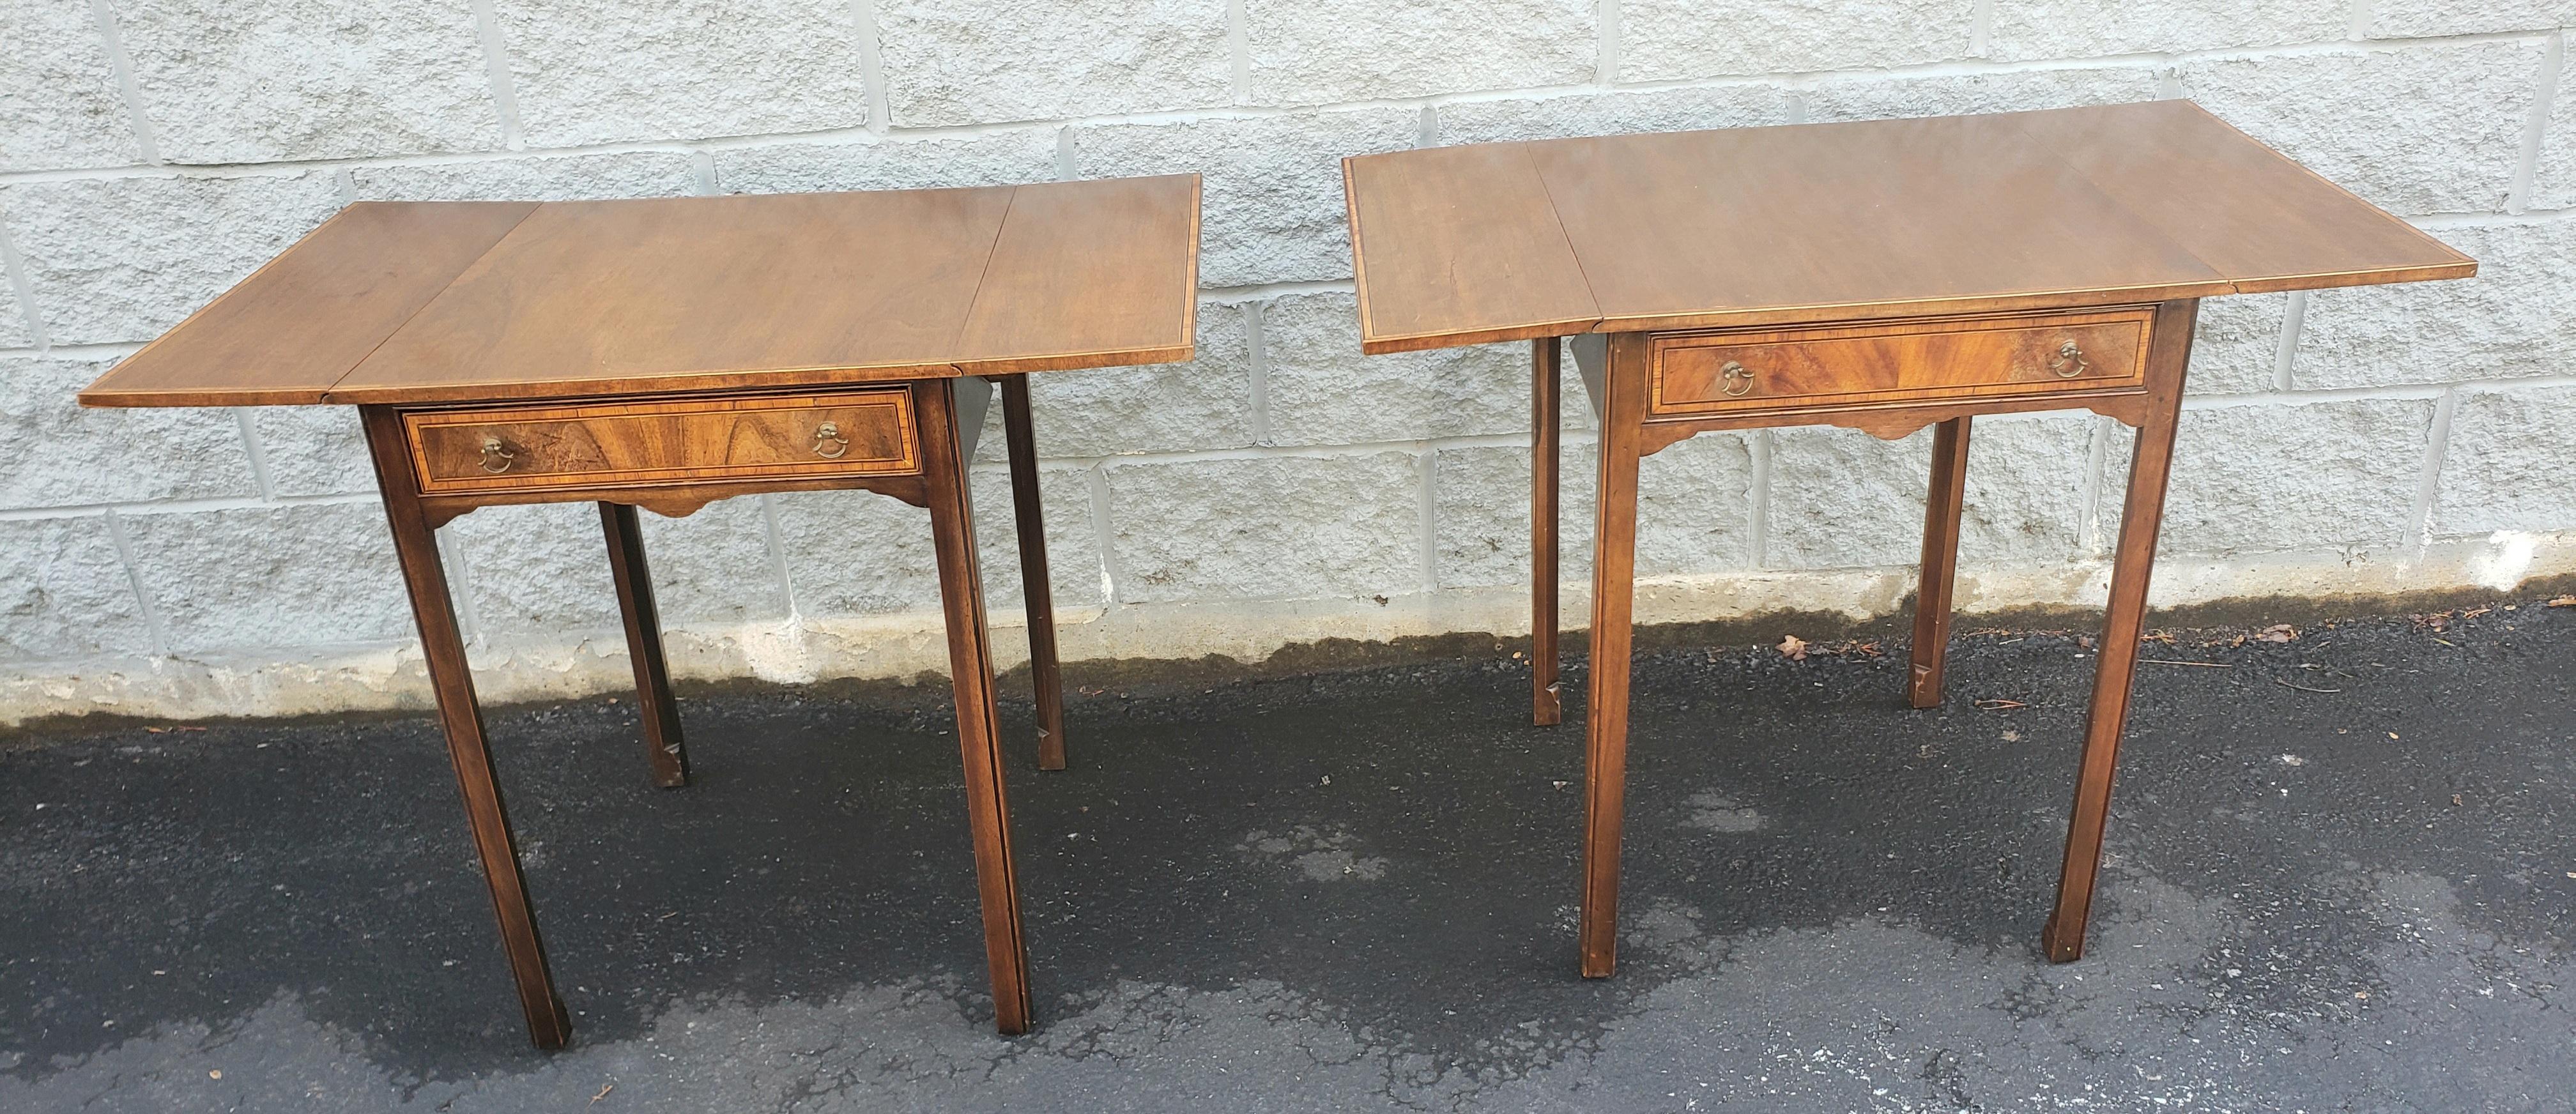 Pair of 1930s George III Cross-Banded Mahogany Inlay Pembroke Tables For Sale 3